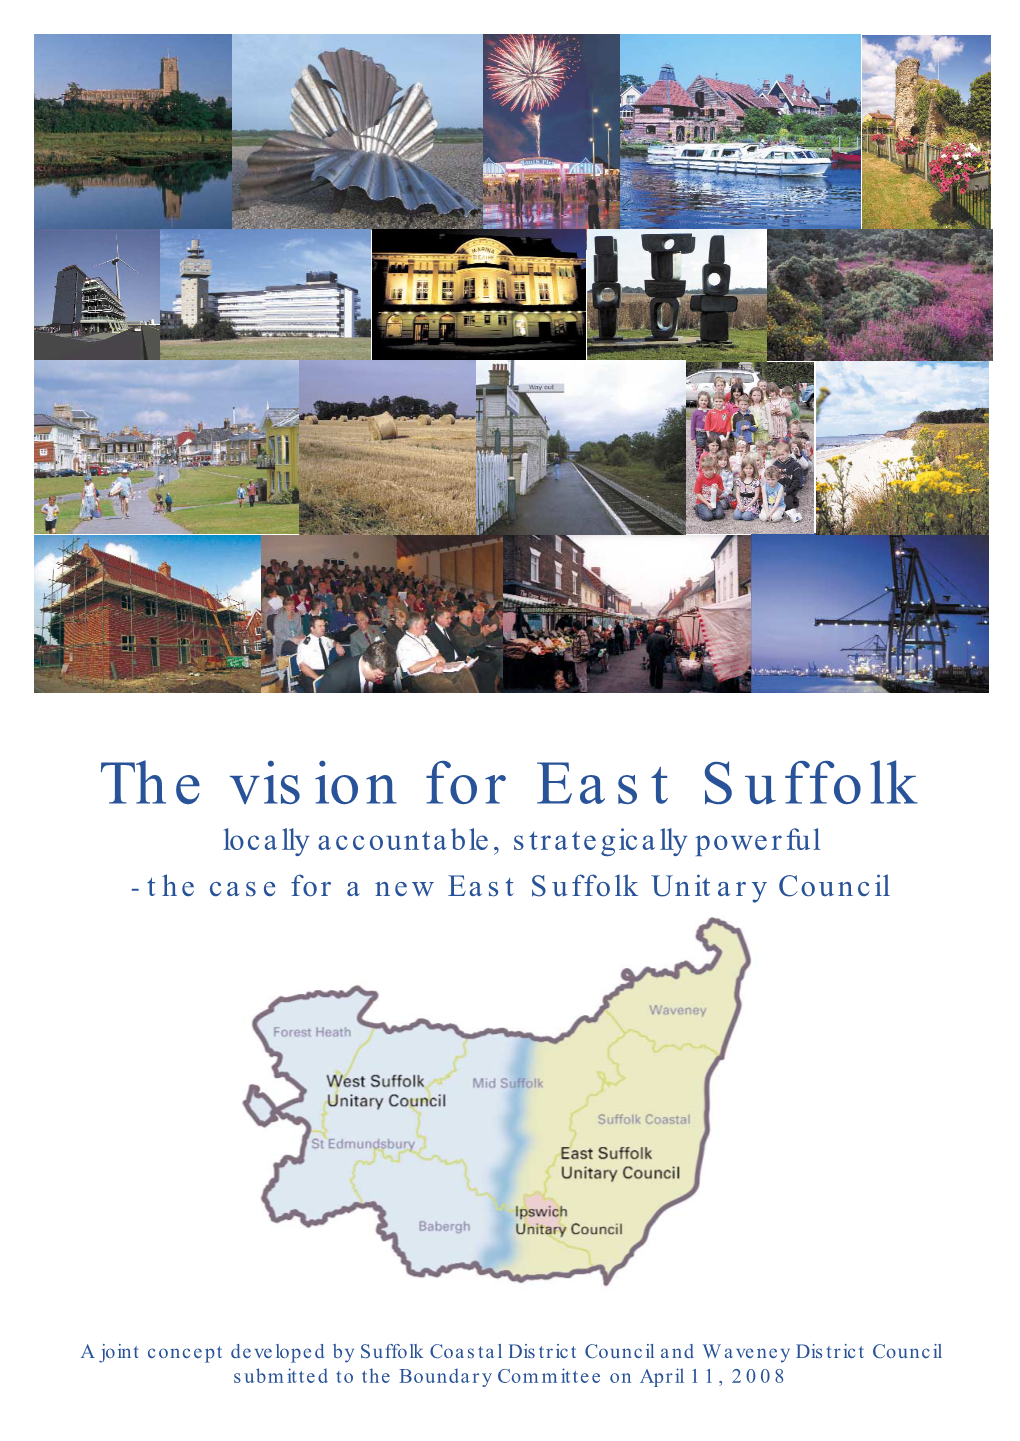 The Vision for East Suffolk Locally Accountable, Strategically Powerful - the Case for a New East Suffolk Unitary Council